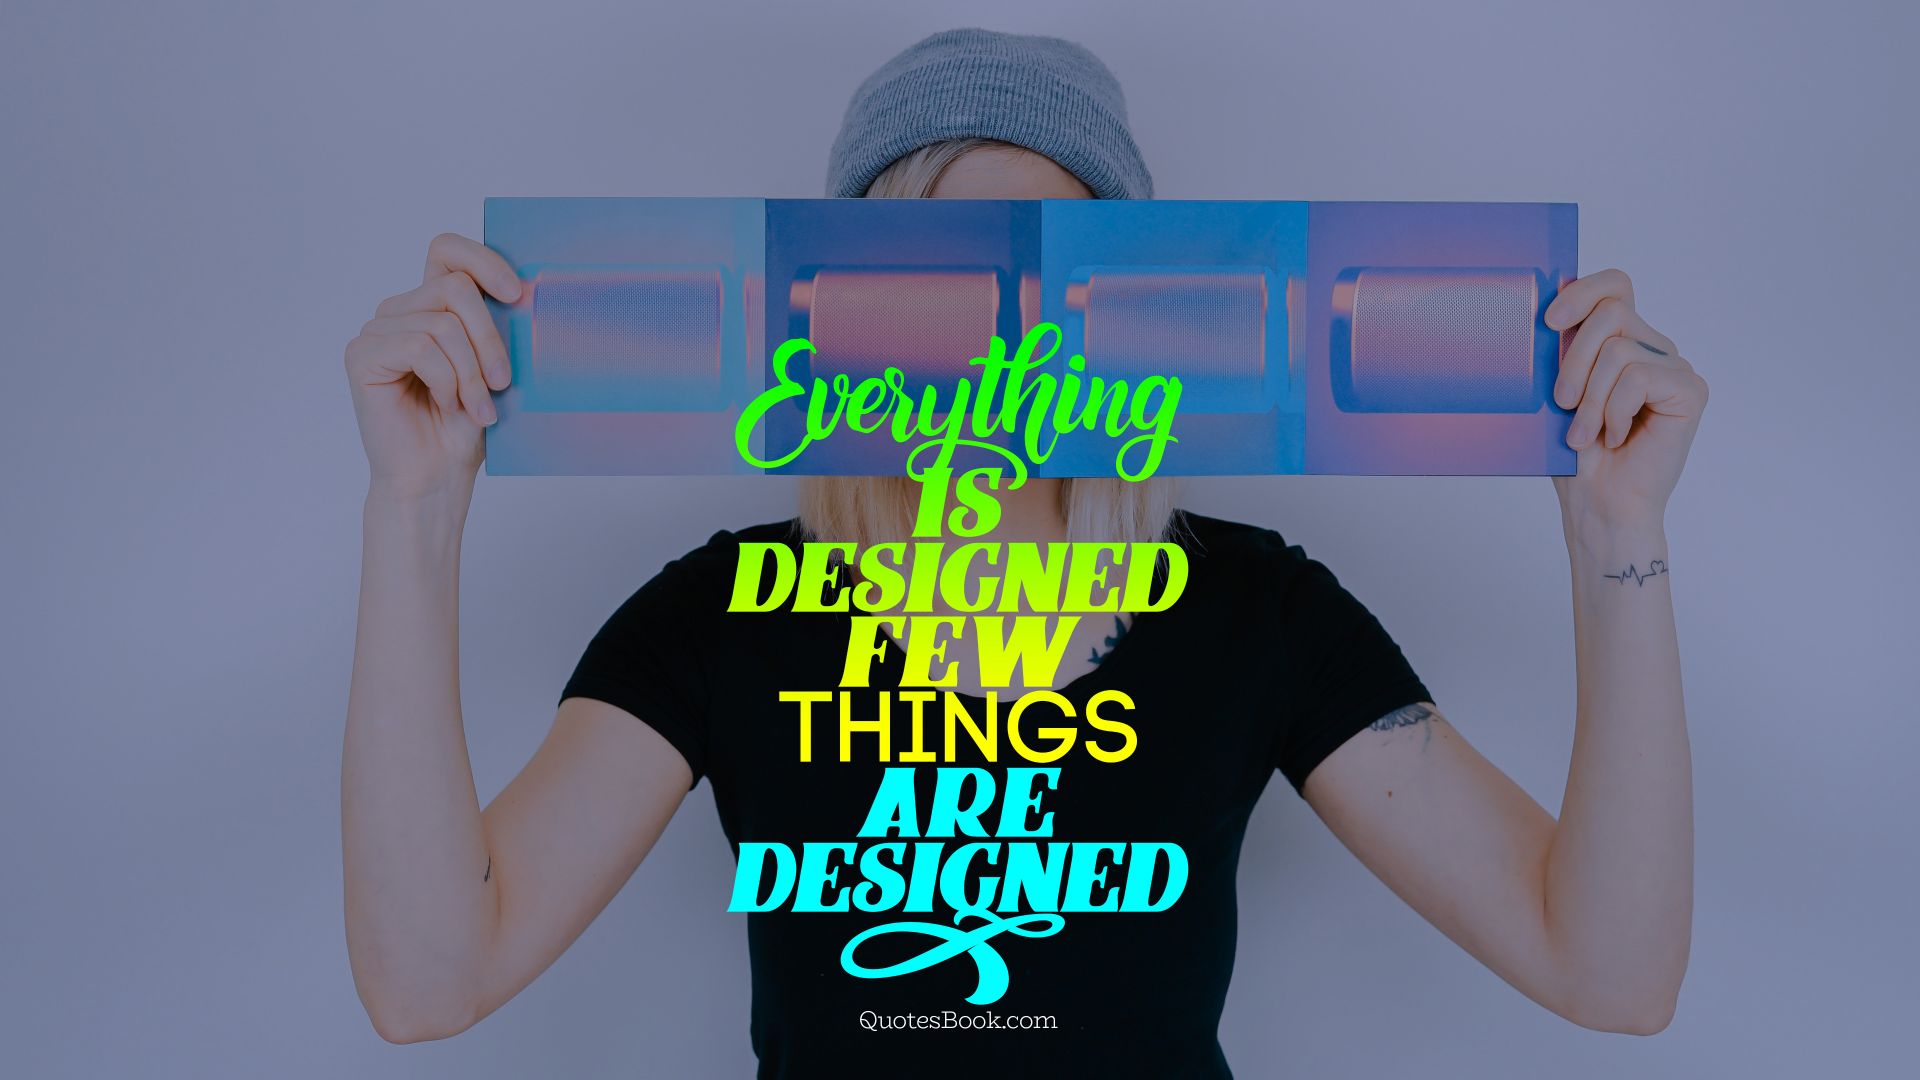 Everything is designed few things are designed well